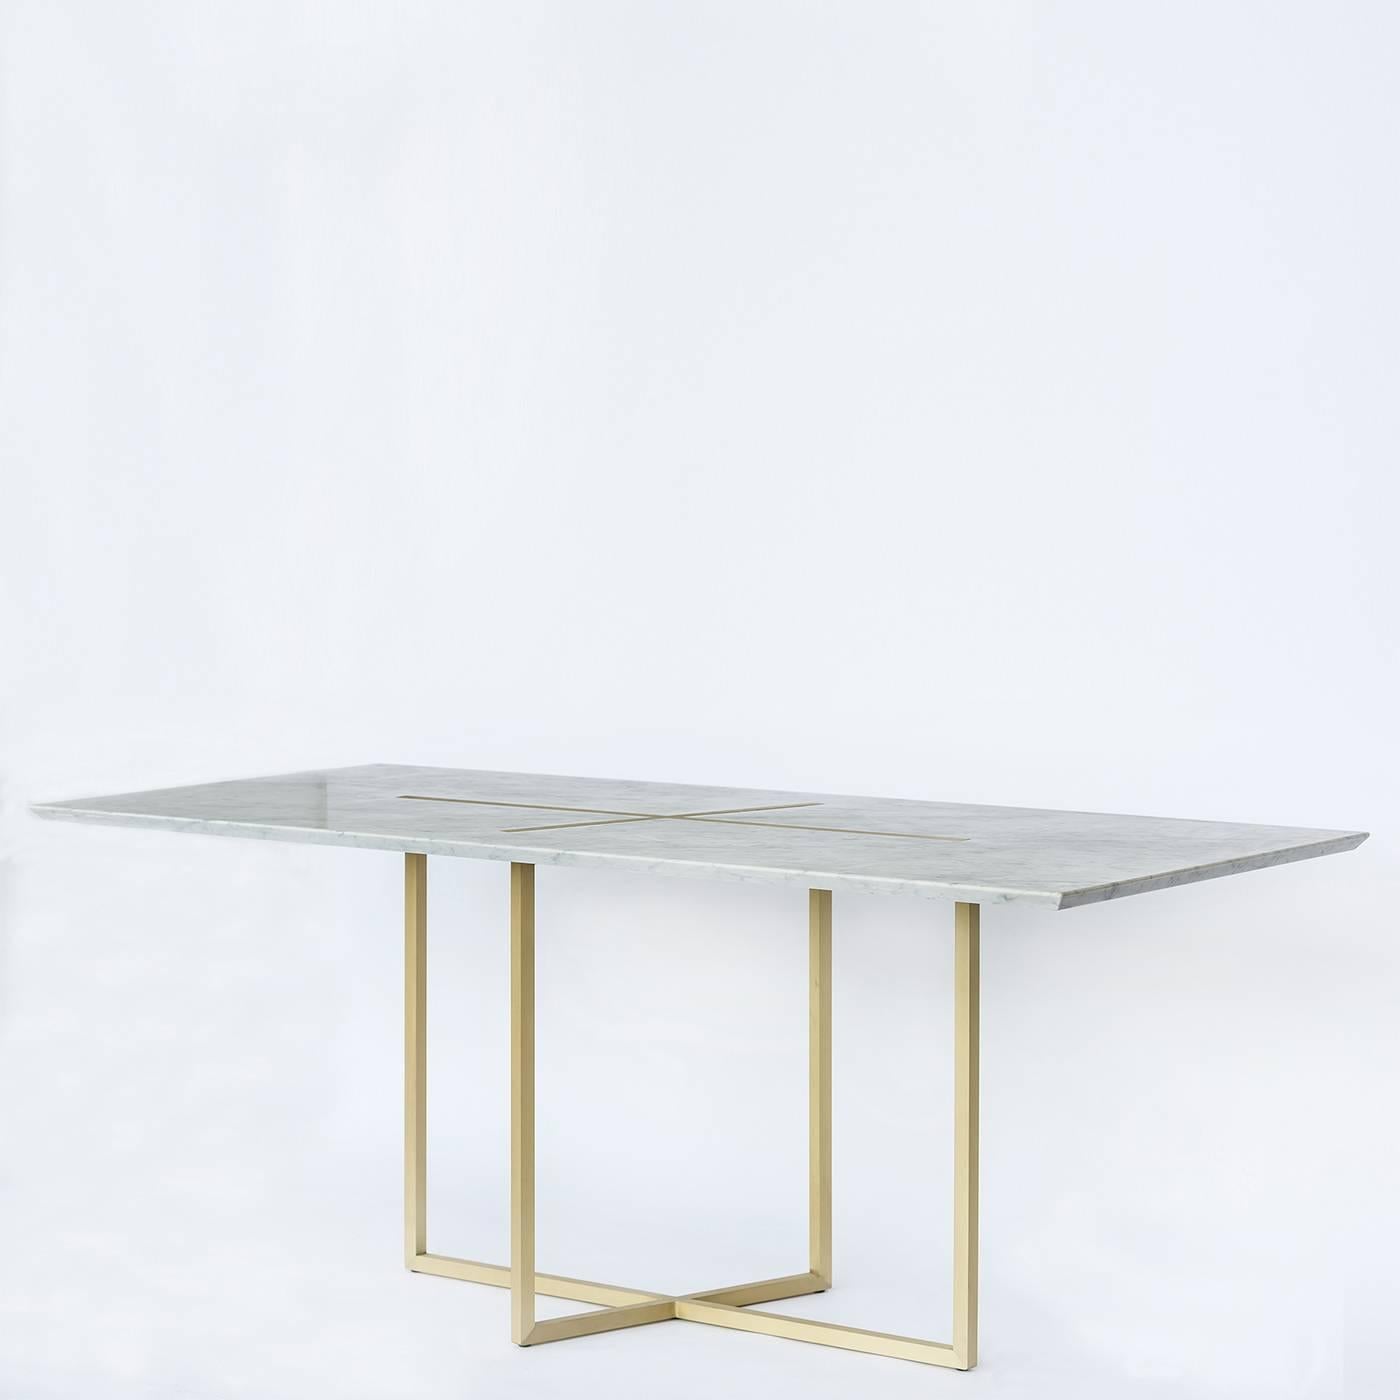 This exquisite dining table features a top of solid white Carrara marble with a striking decoration of two brass lines crossing at its center. The top rests on a structure of solid brushed brass.